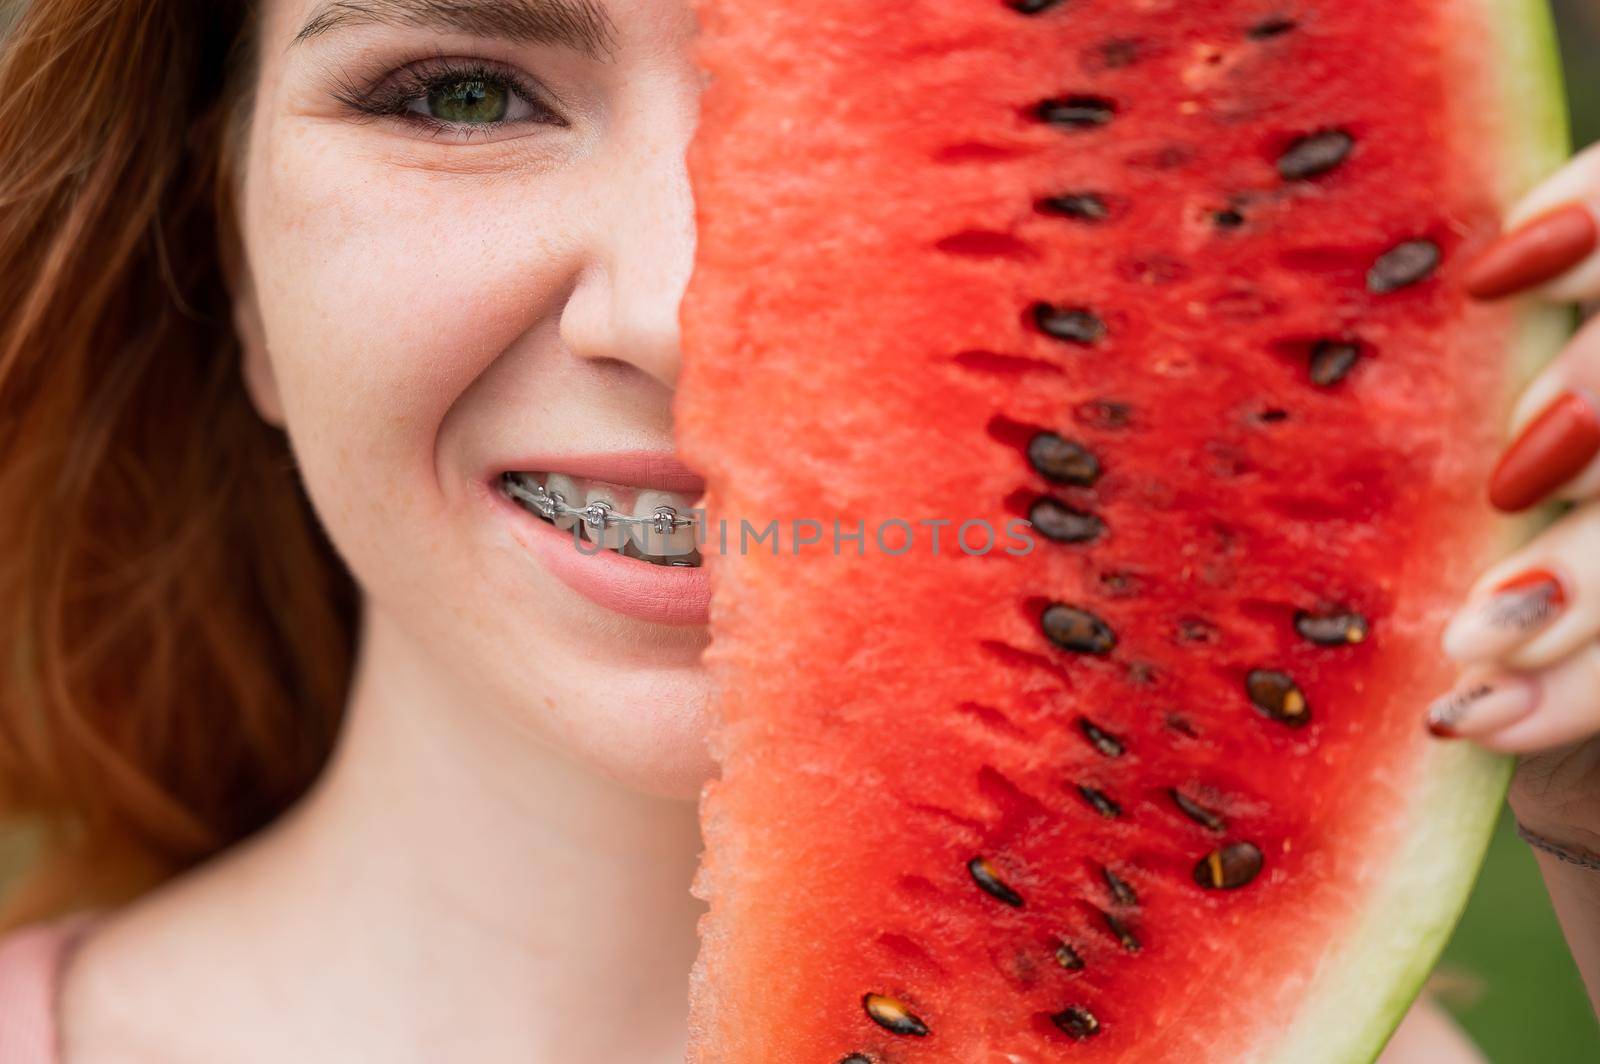 Beautiful red-haired woman smiling with braces on her teeth covers half of her face with a slice of watermelon outdoors in summer by mrwed54